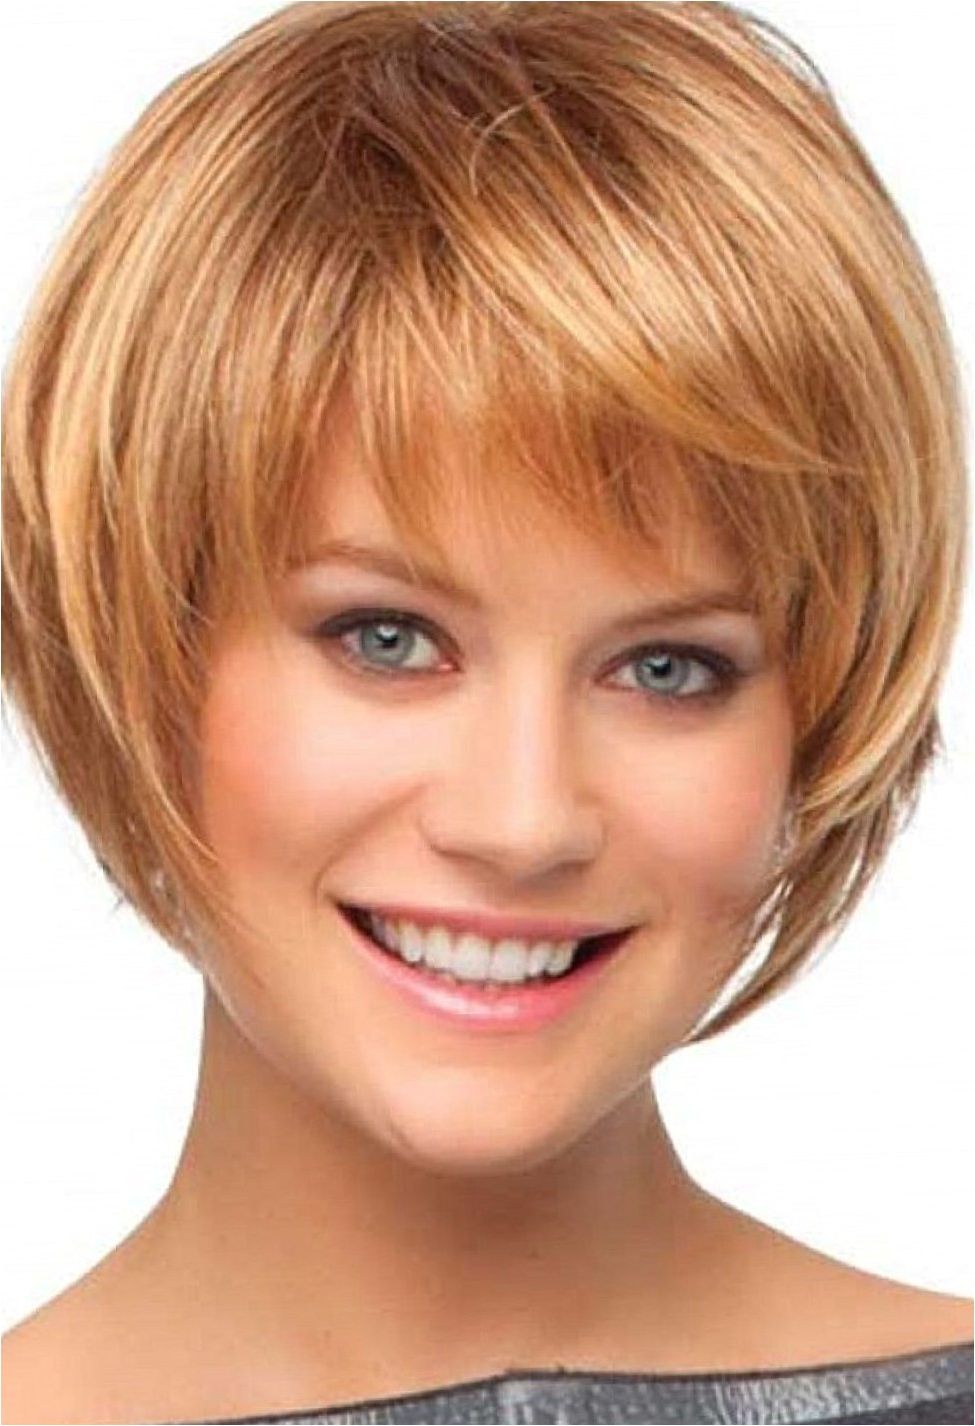 Pictures Of Short Bob Haircuts With Layers | Elwebdesants Inside Layered Short Bob Haircuts (Gallery 20 of 20)